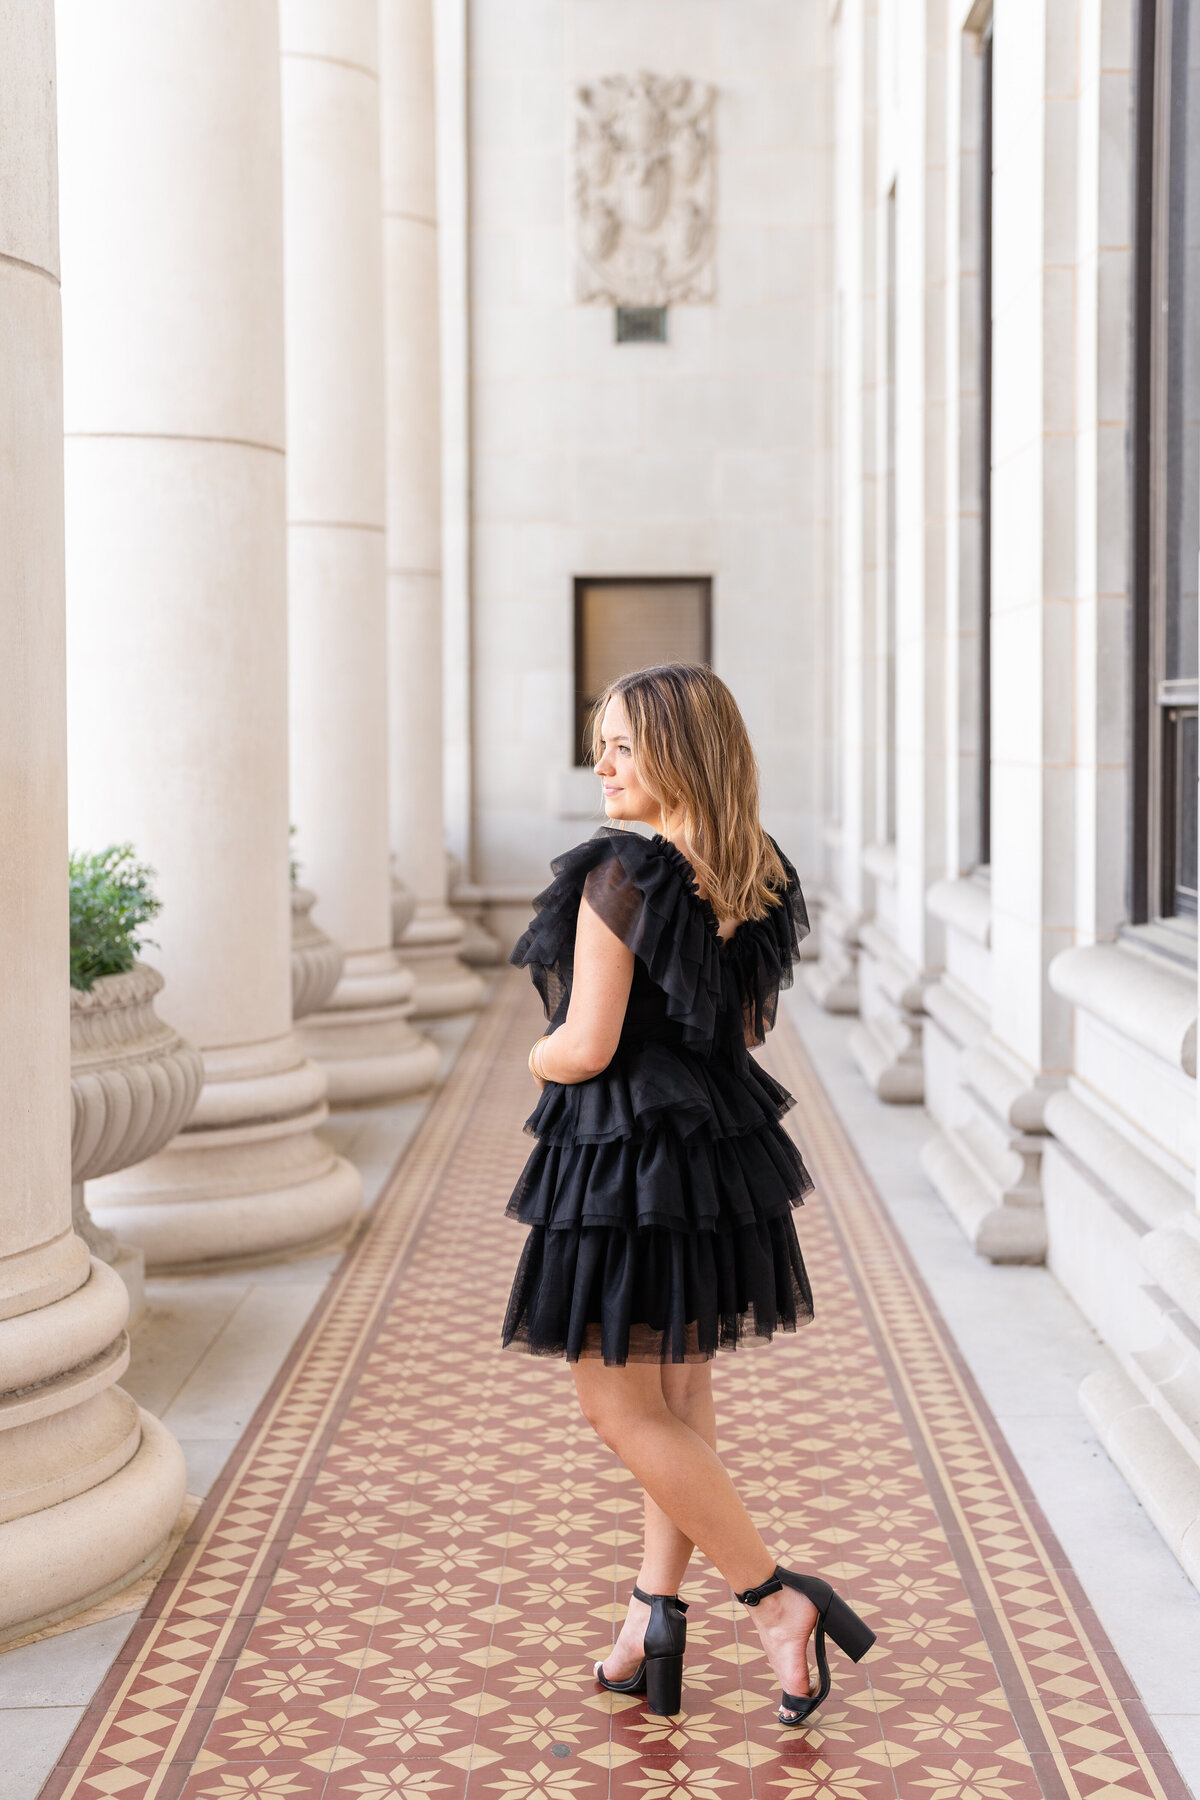 Texas A&M senior girl turned away from camera and looking over shoulder while wearing fluffy black dress in middle of Administration Building columns